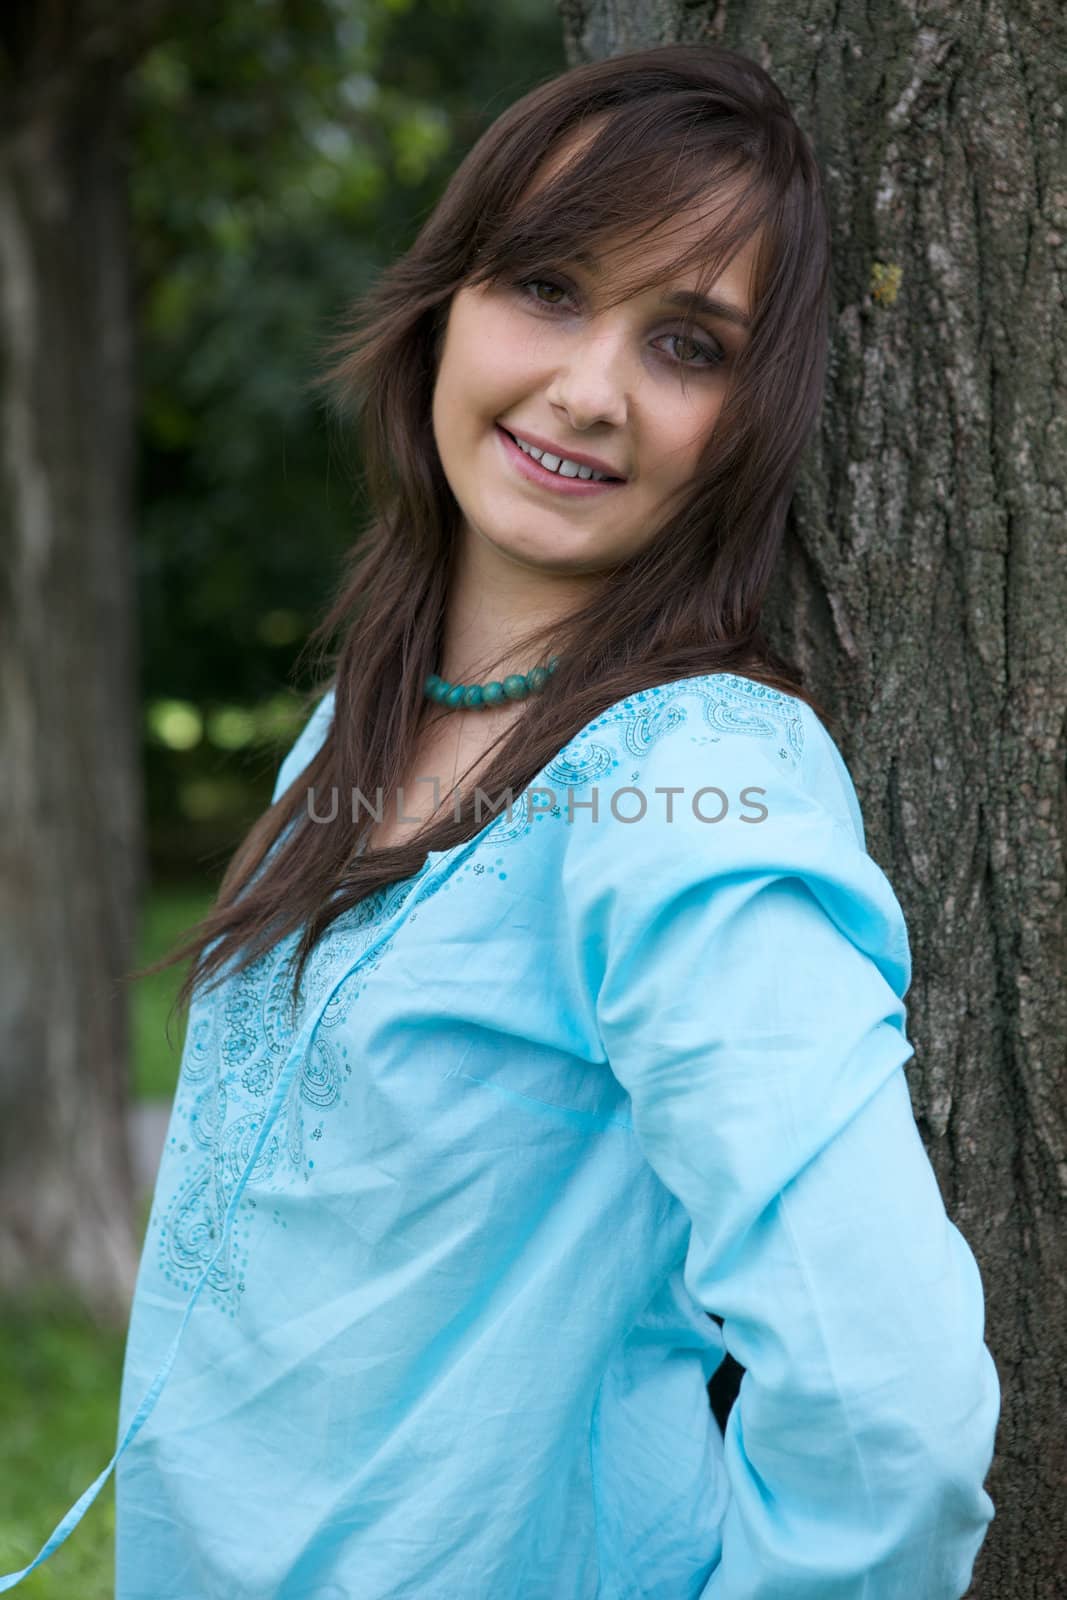 Portrait of young woman smiling by tree trunk